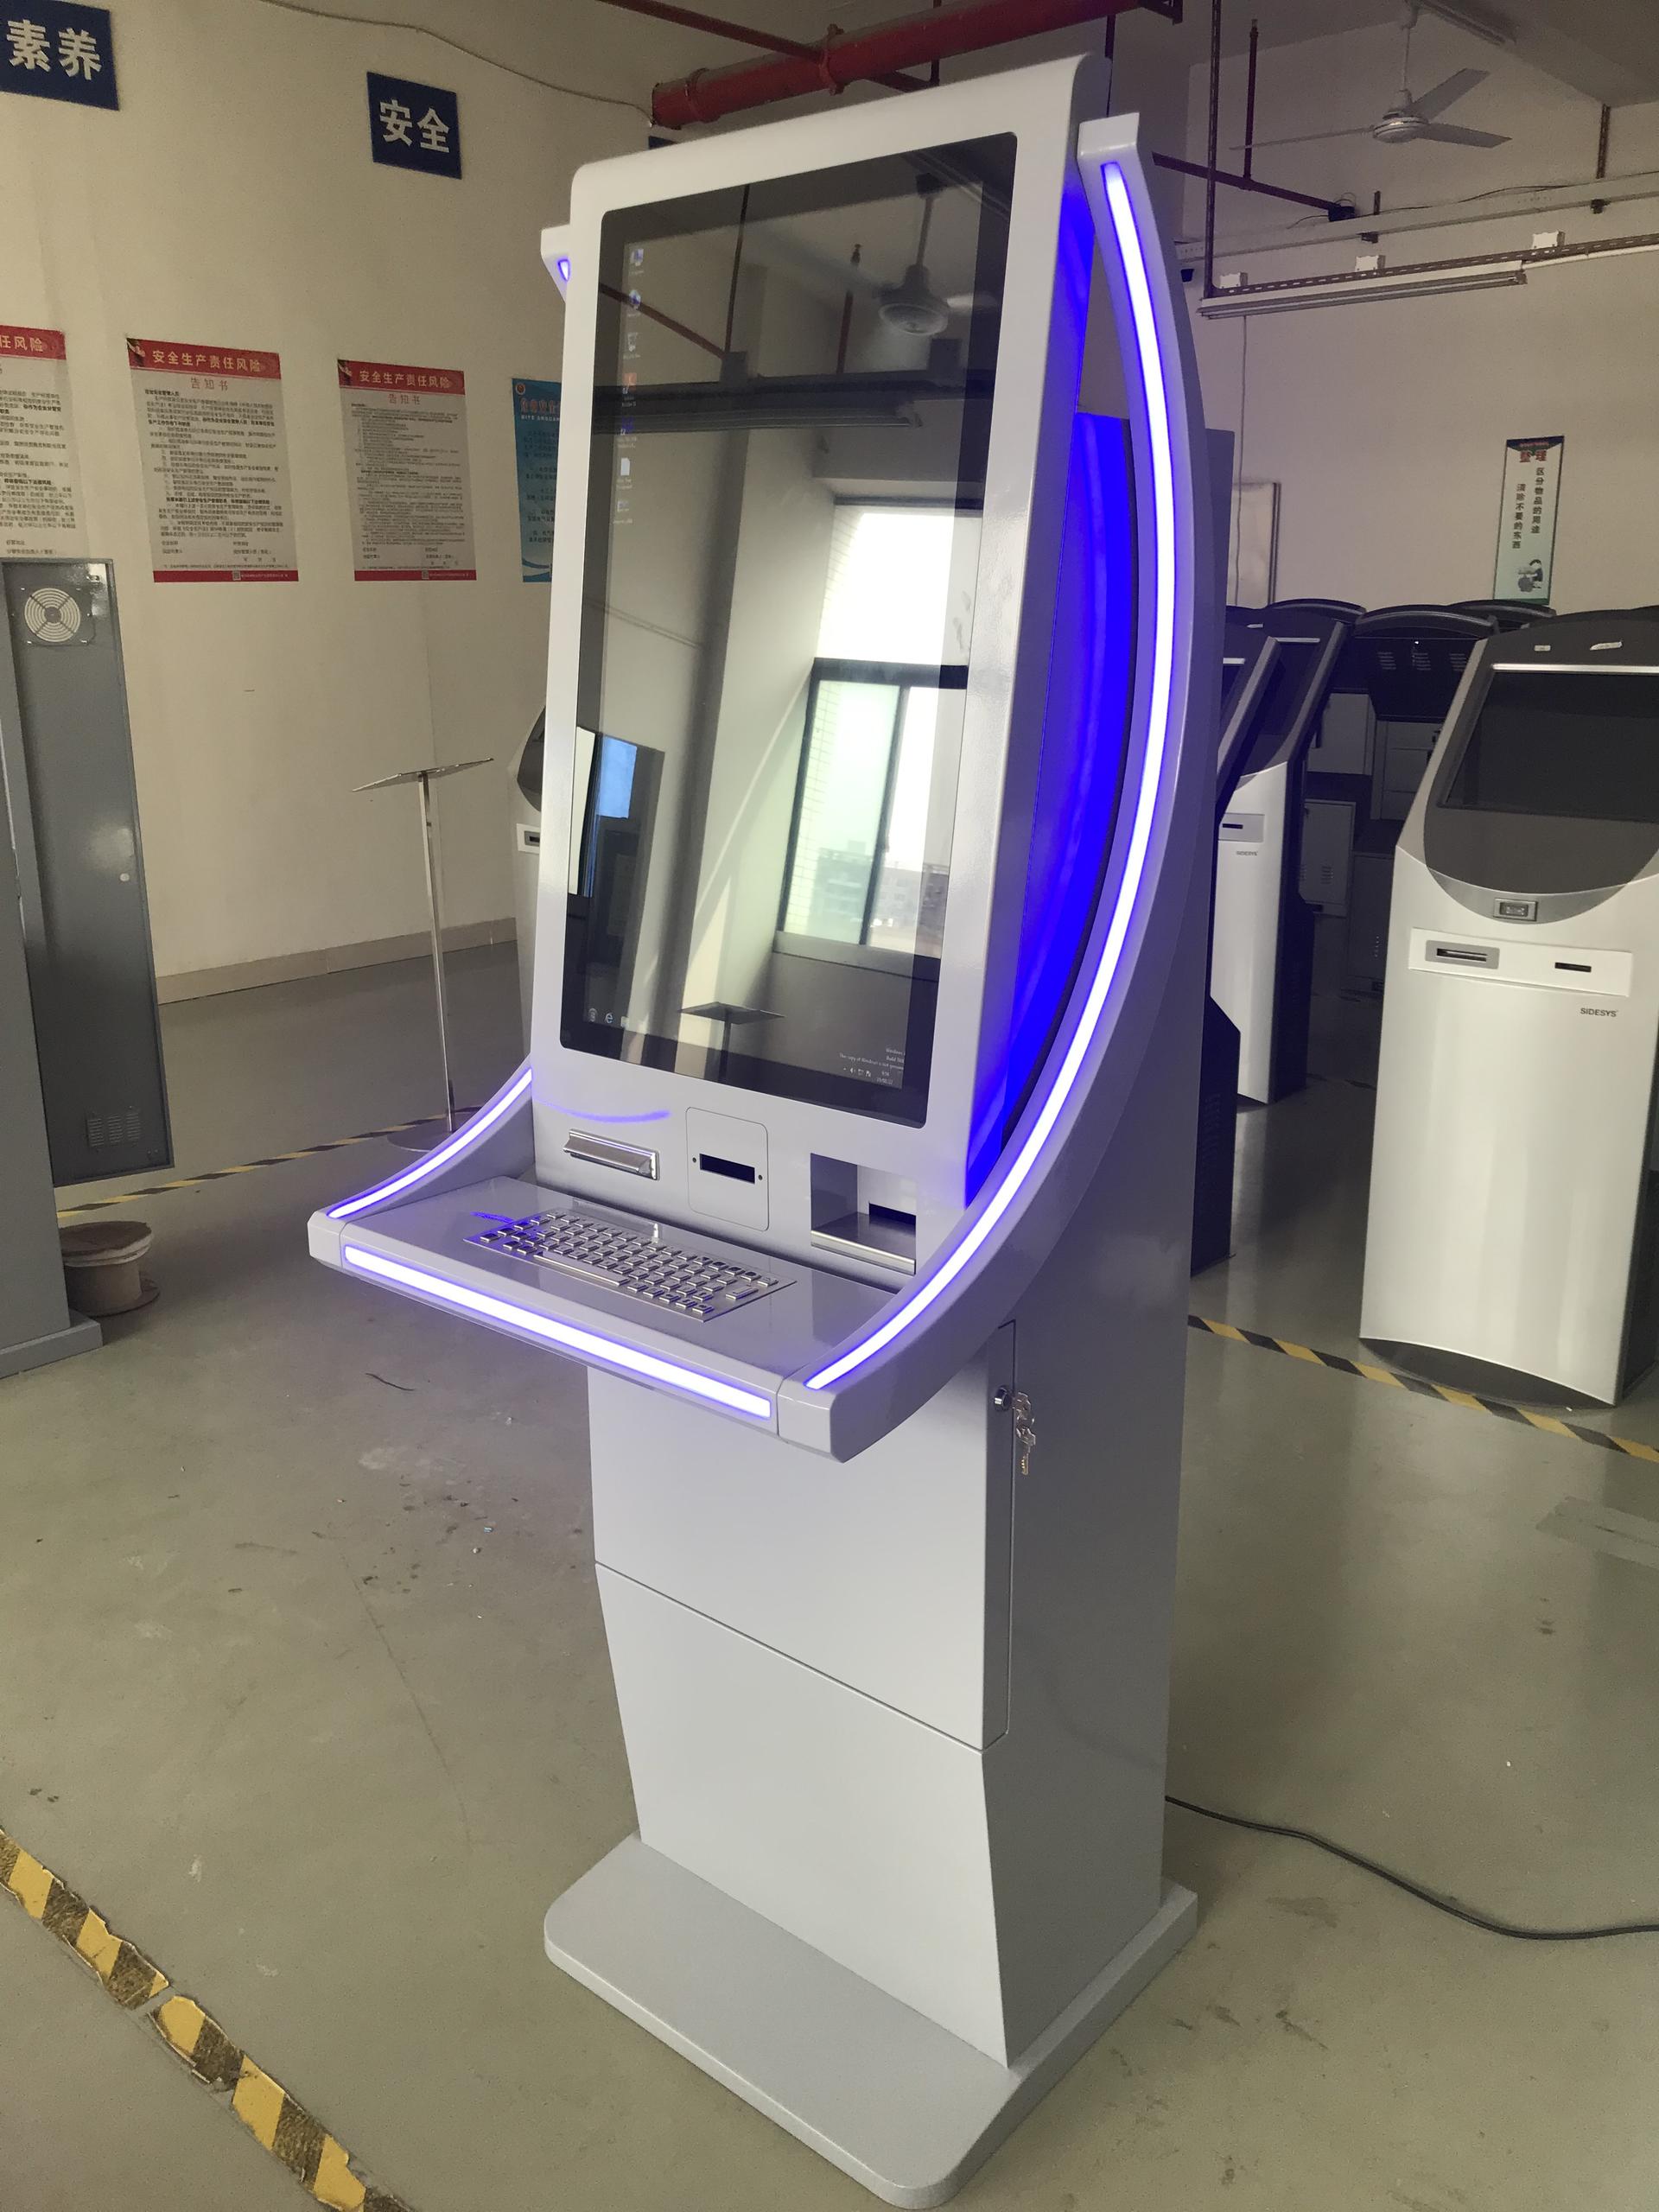 Prepaid Card Printing Kiosk with Recharge Dispenser